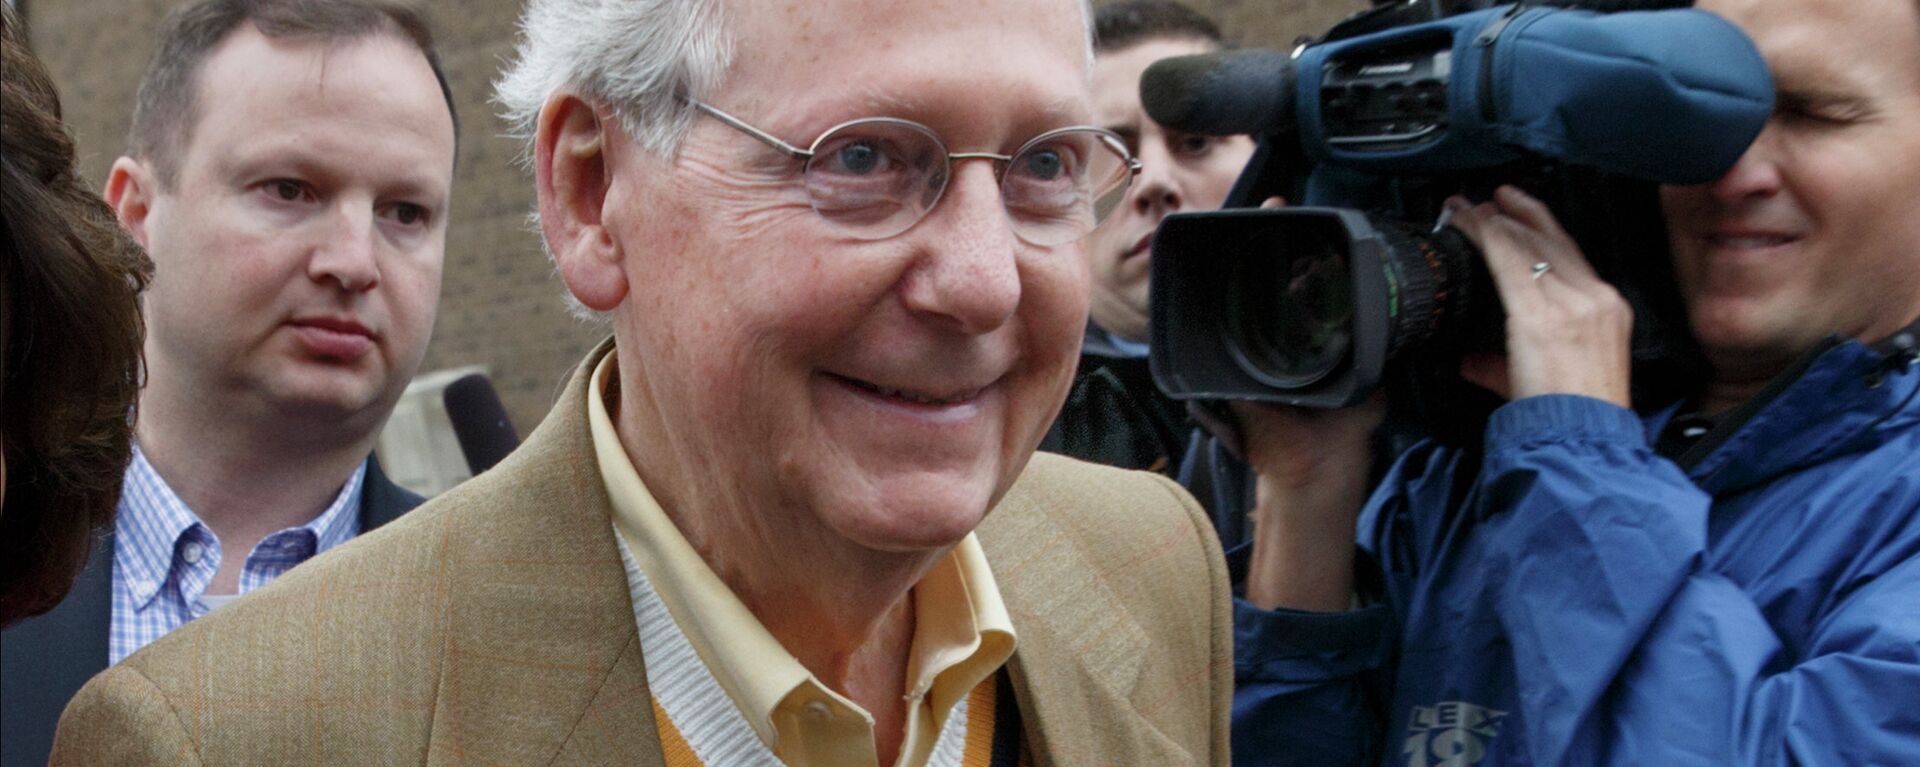 Senate Minority Leader Mitch McConnell, R-Ky., smiles after casting his ballot in the midterm election at the voting precinct at Bellarmine University in Louisville, Ky., Tuesday, Nov. 4, 2014 - Sputnik International, 1920, 15.10.2021